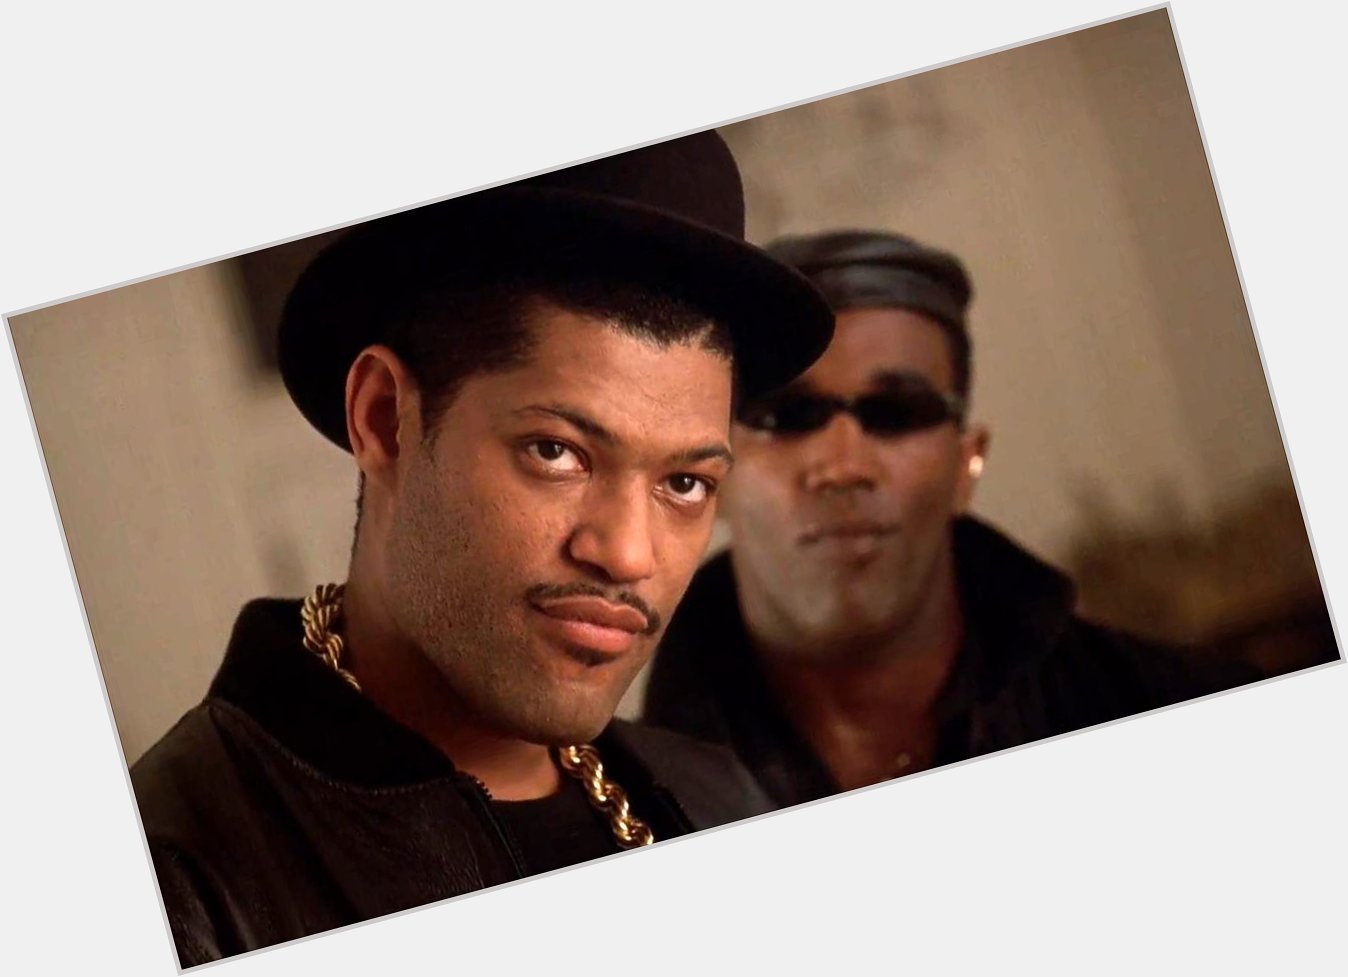 Another guy I share a birthday with! Happy bday Laurence Fishburne! 